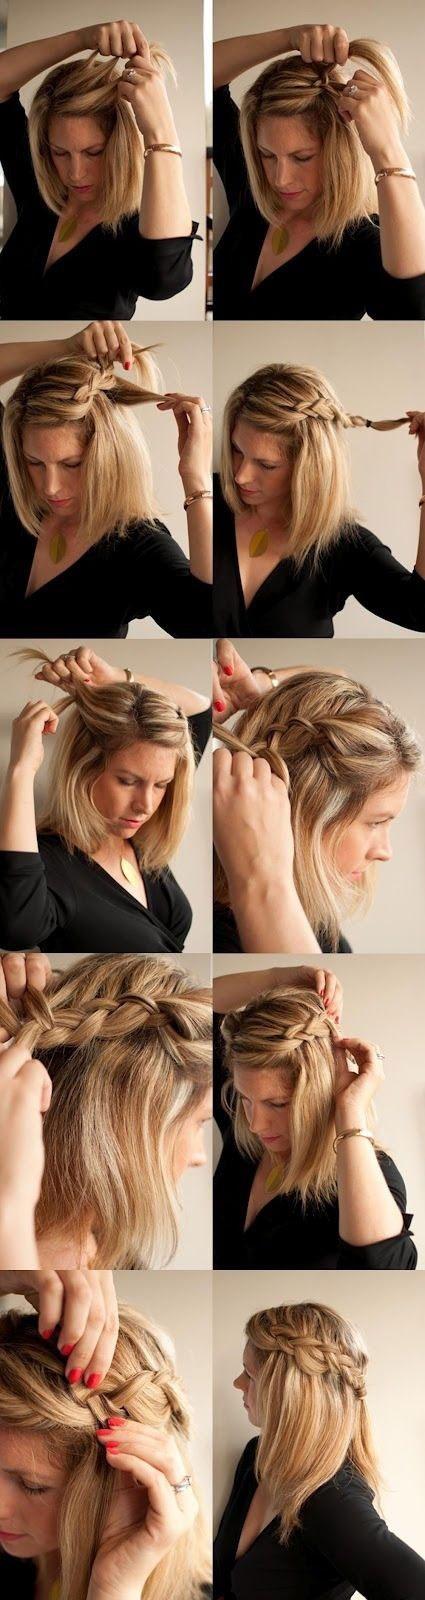 Easy quick hairstyles for medium hair easy-quick-hairstyles-for-medium-hair-74_20